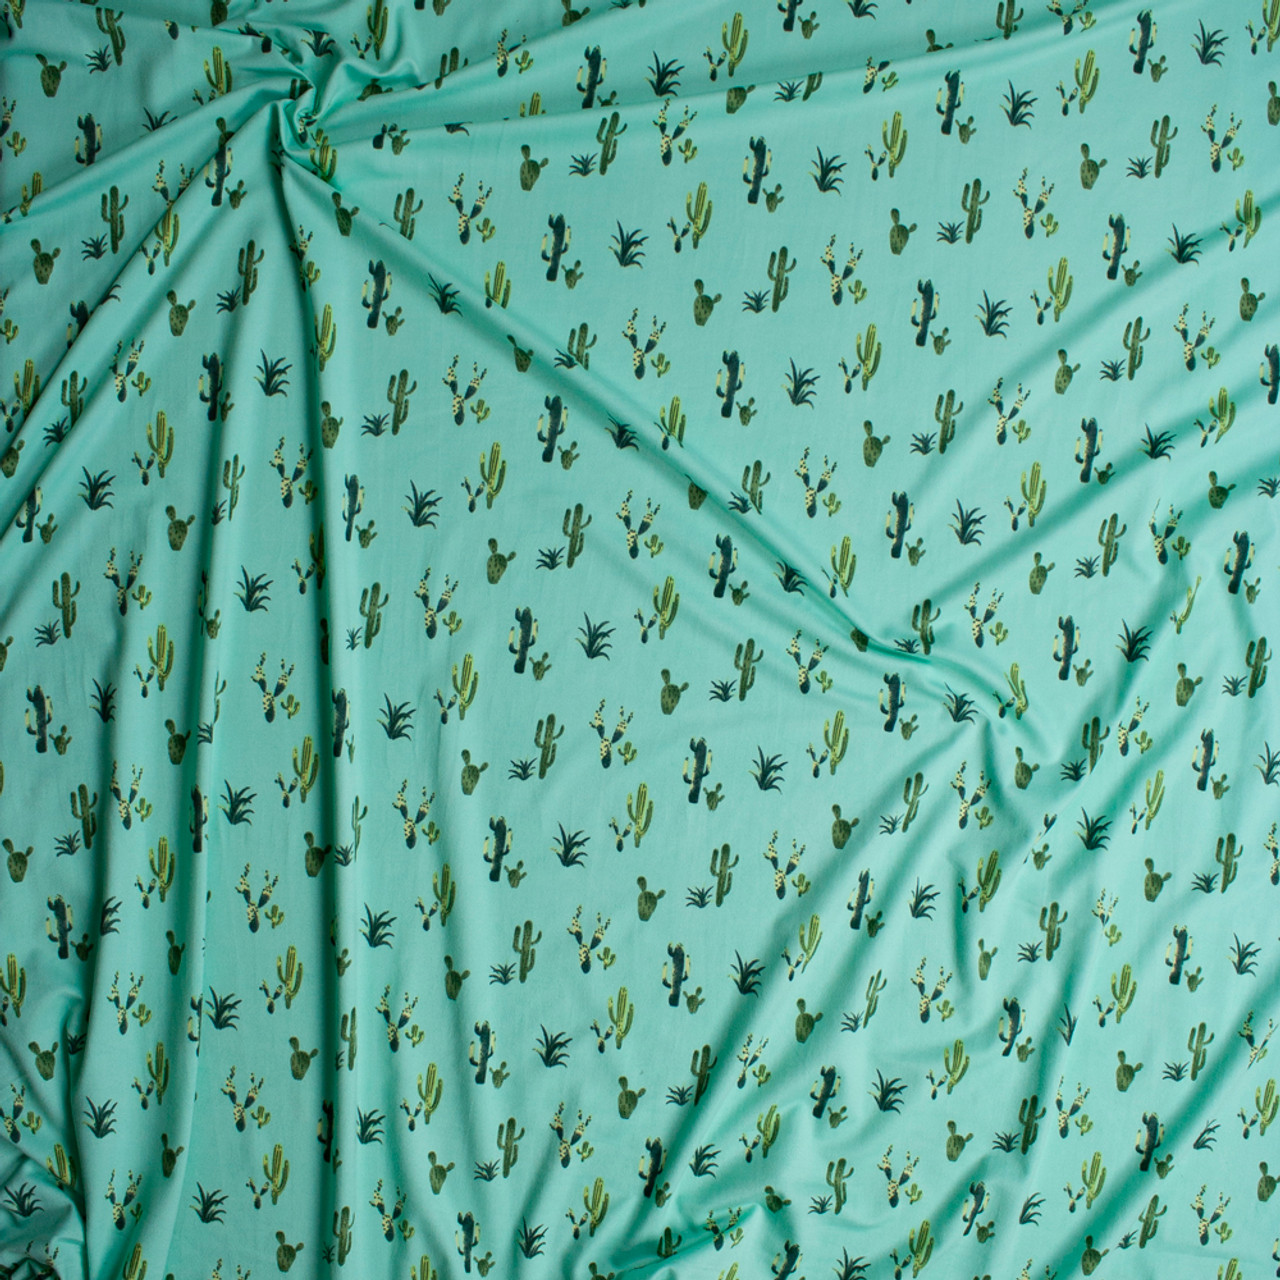 Cali Fabrics Green Cactus on Mint Double Brushed Poly/Spandex Knit ...